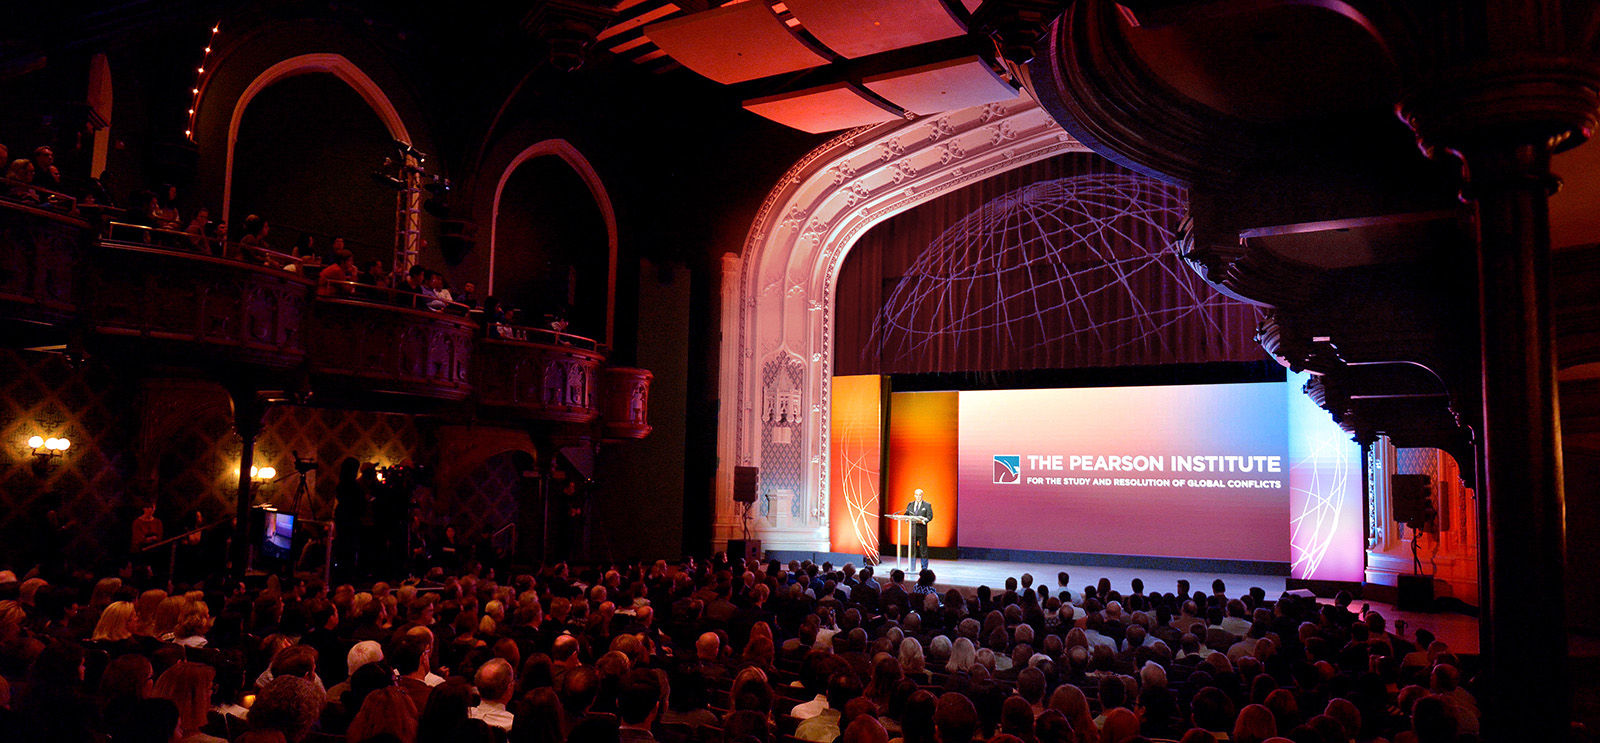 The Pearson gift announcement ceremony